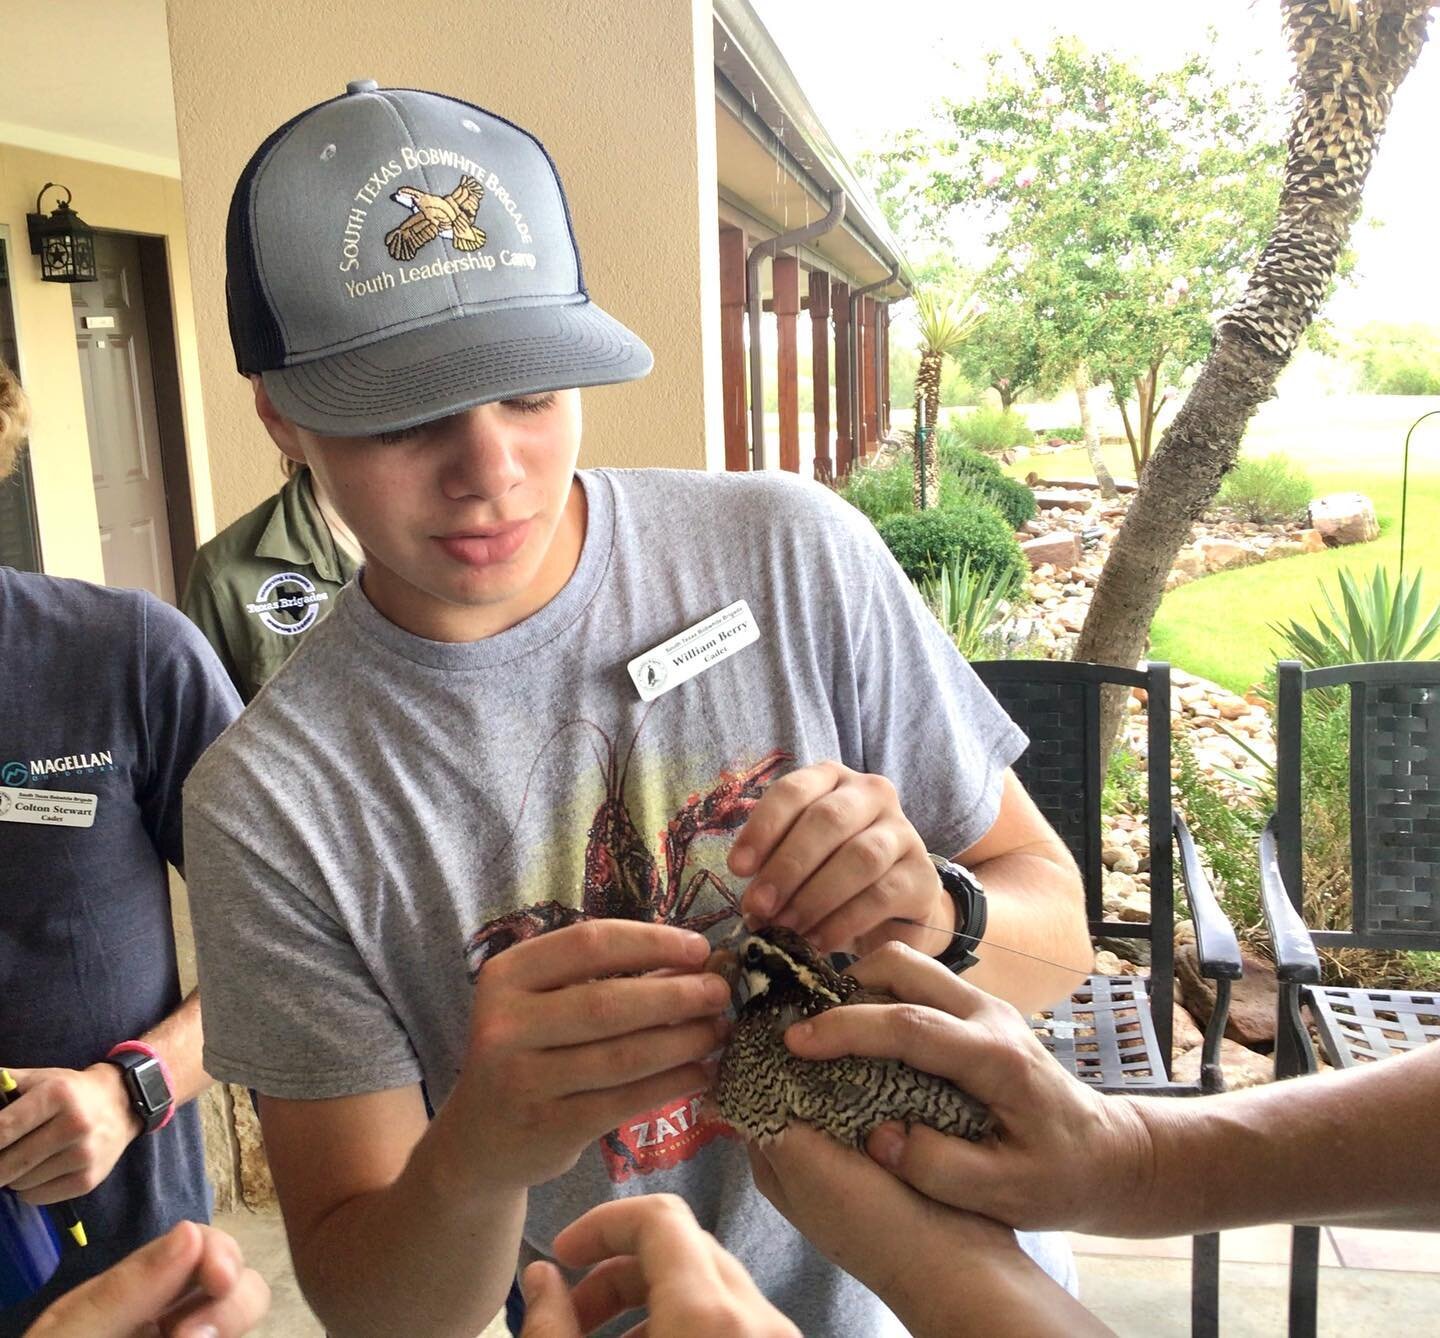 Camp Highlight &mdash; South Texas Bobwhite Brigade

The 24th Battalion of South Texas Bobwhite Brigade took place June 18-22 in McCoy, TX. Cadets learned all about bobwhite ecology and management, and in addition, received experience with a variety 